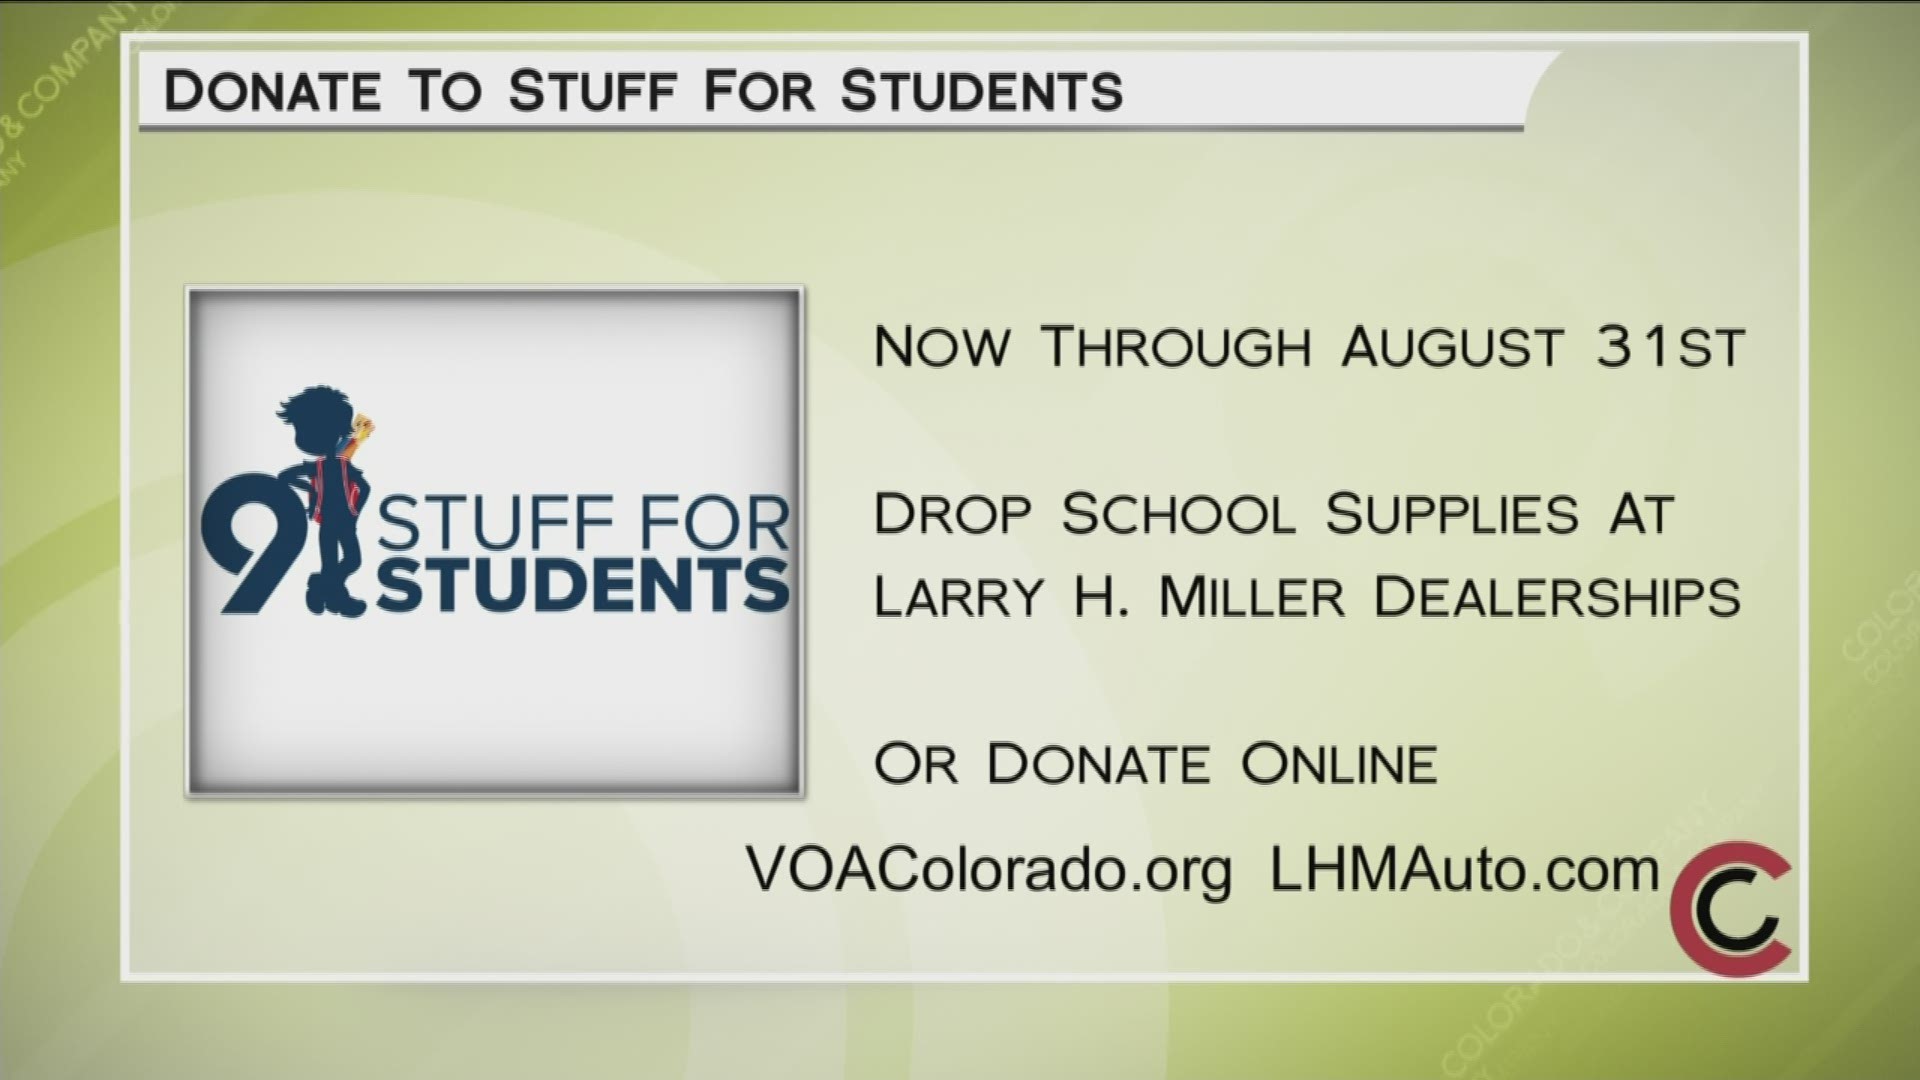 Help Colorado students get the stuff they need to succeed by donating school supplies at any Larry H Miller dealership location. Financial donations can be made through the Volunteers of America website. Learn more at www.LHMAuto.com.